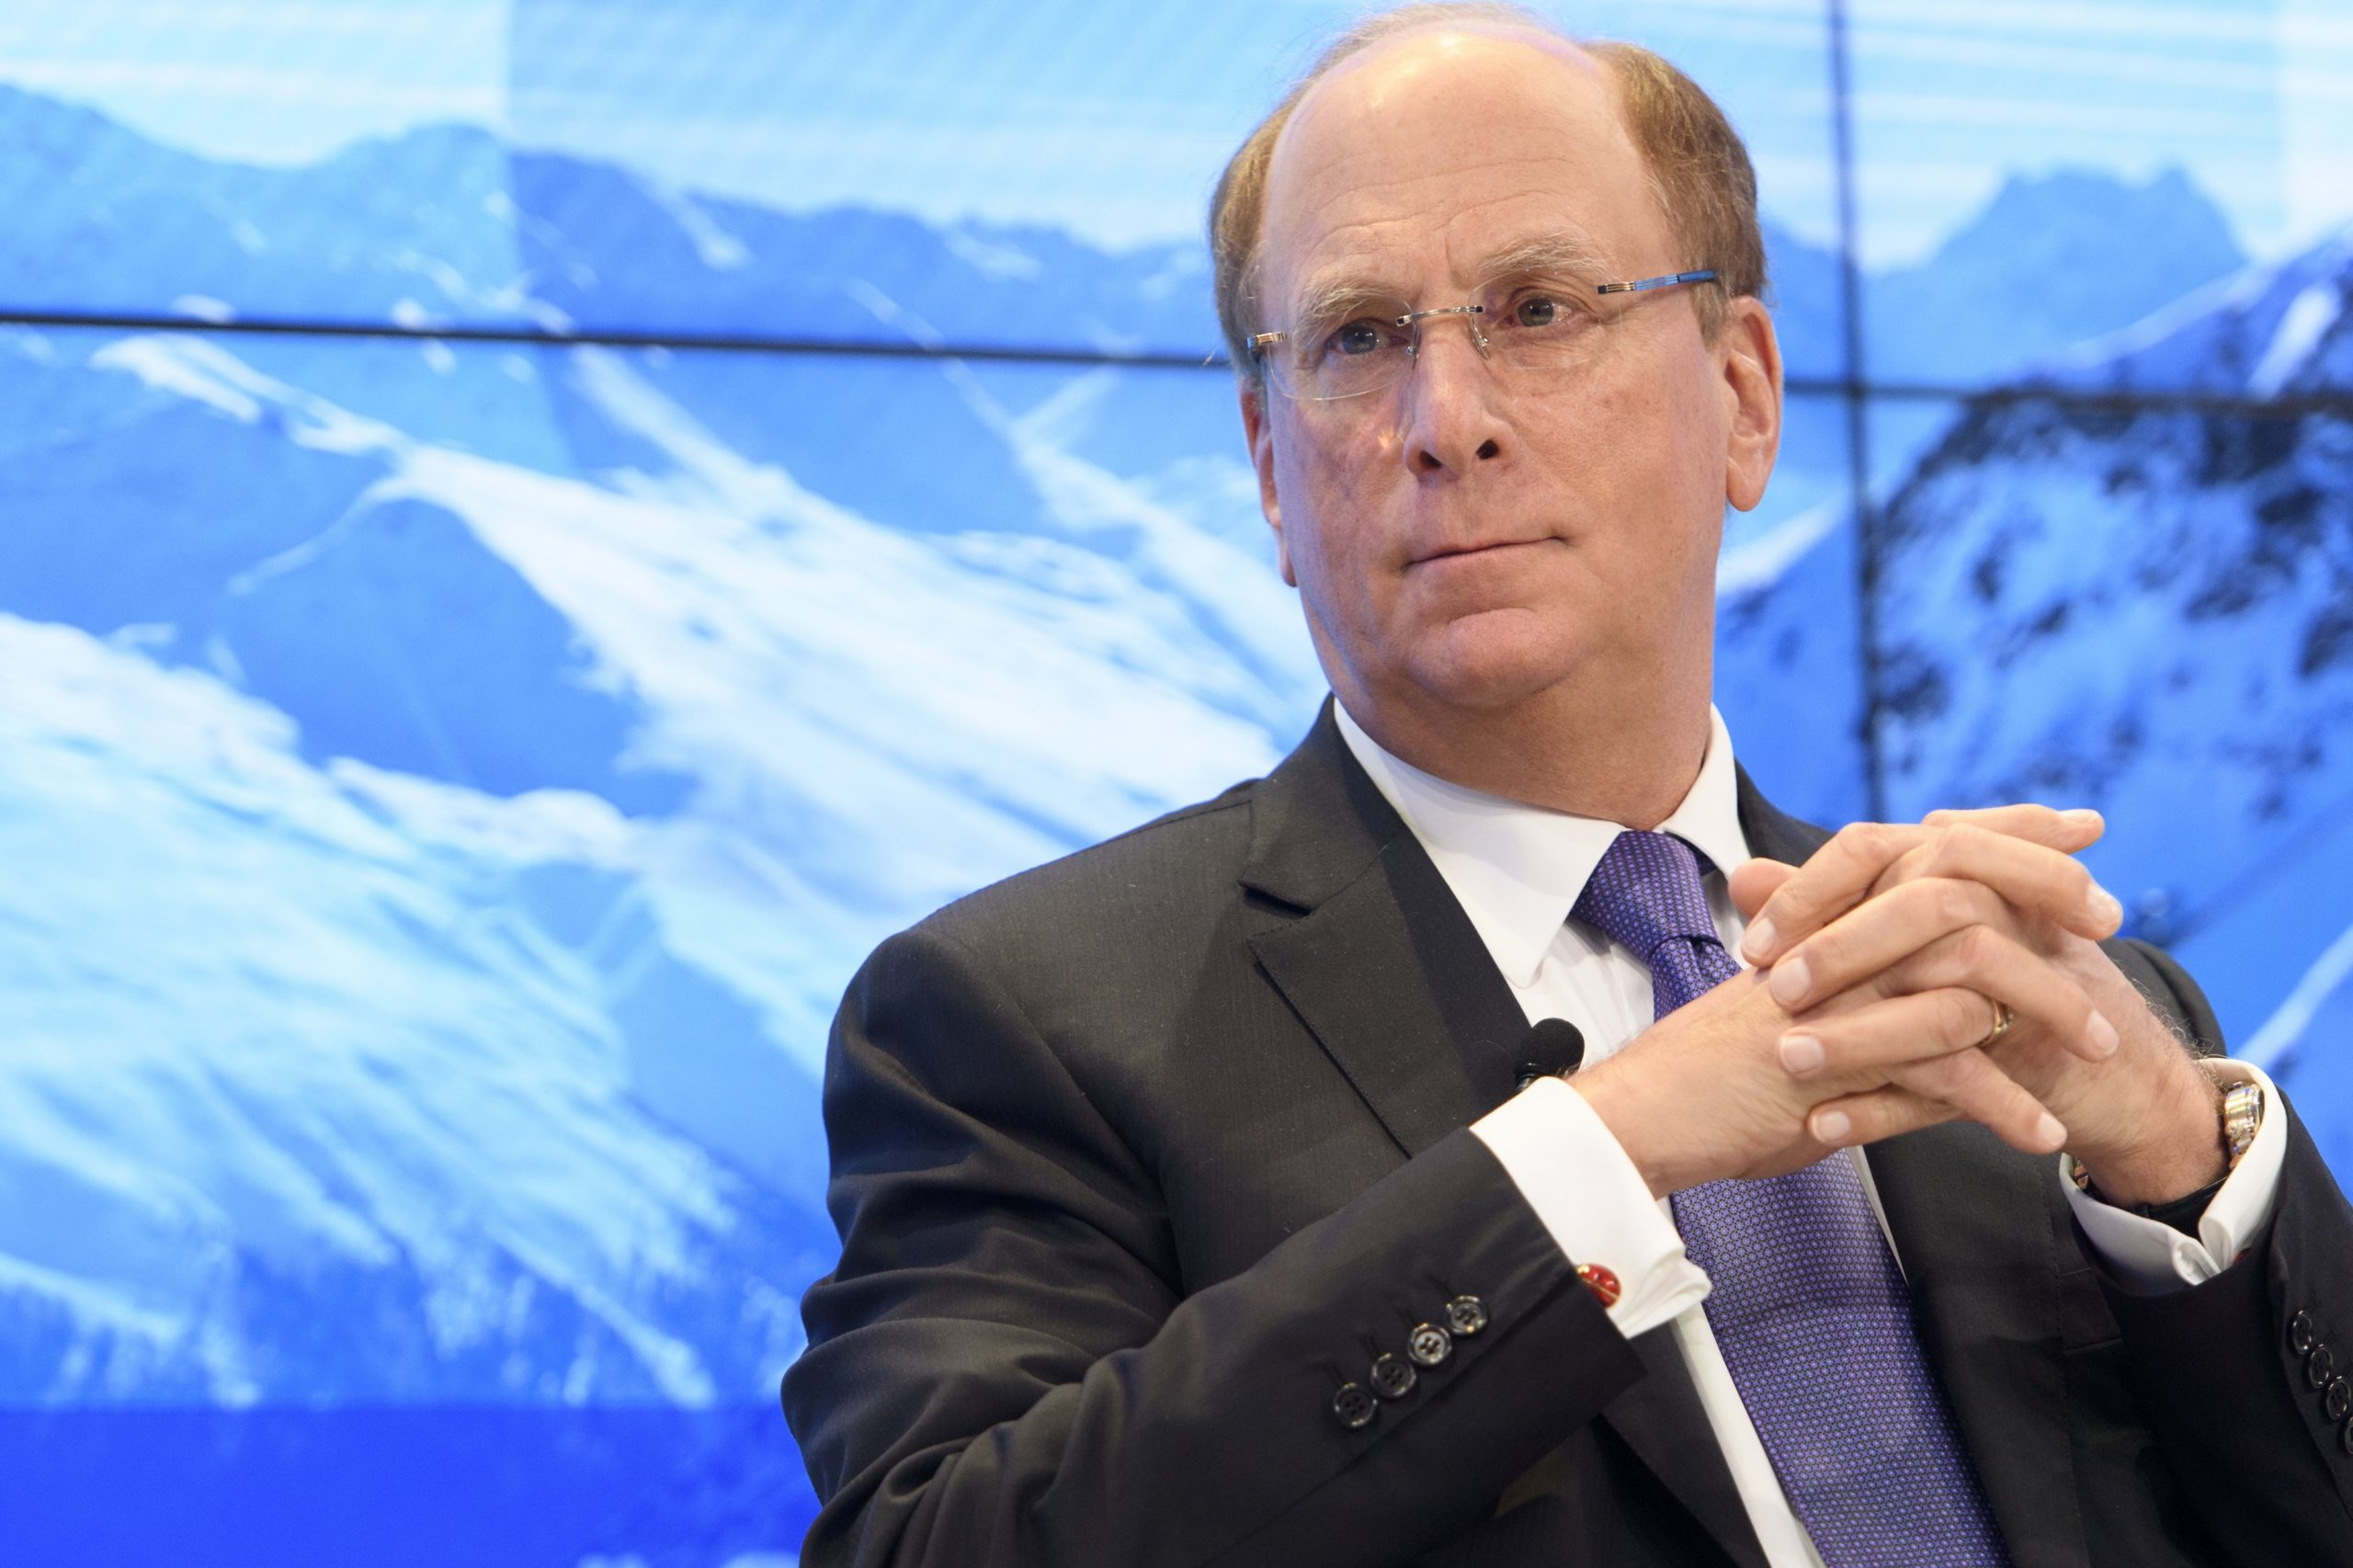 Laurence D. Fink, Chairman and CEO of BlackRock Inc.